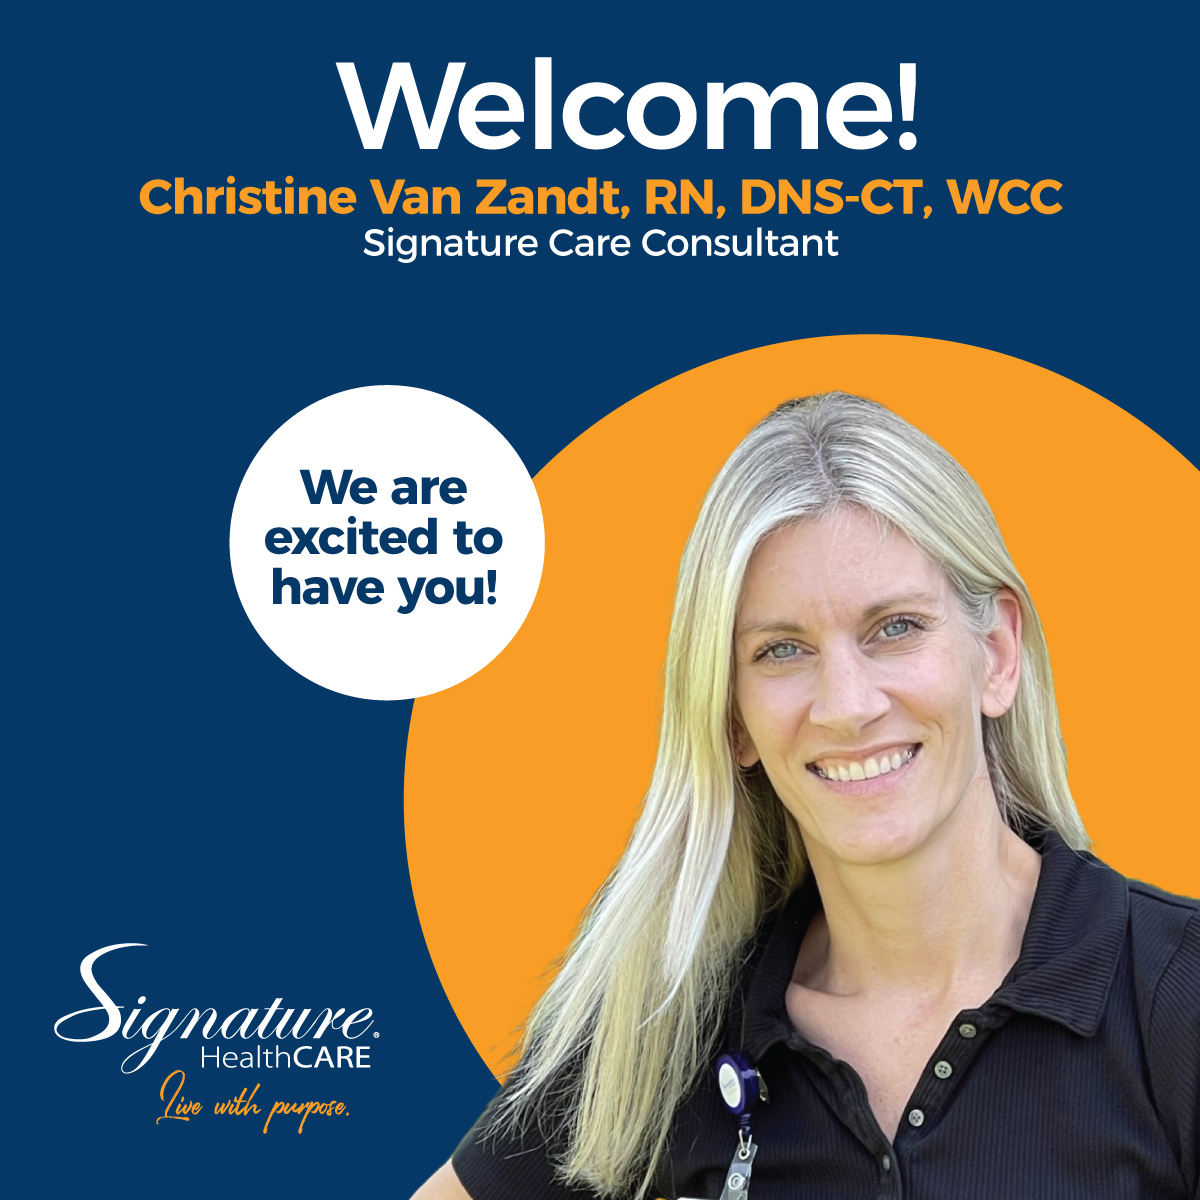 We are delighted to welcome Christine Van Zandt, RN, DNS-CT, WCC, to our Signature Team! Her unique skills and fresh perspective will undoubtedly contribute to our success. We are excited to work together to achieve great things! #JoinTheRevolution #SignatureRevolution